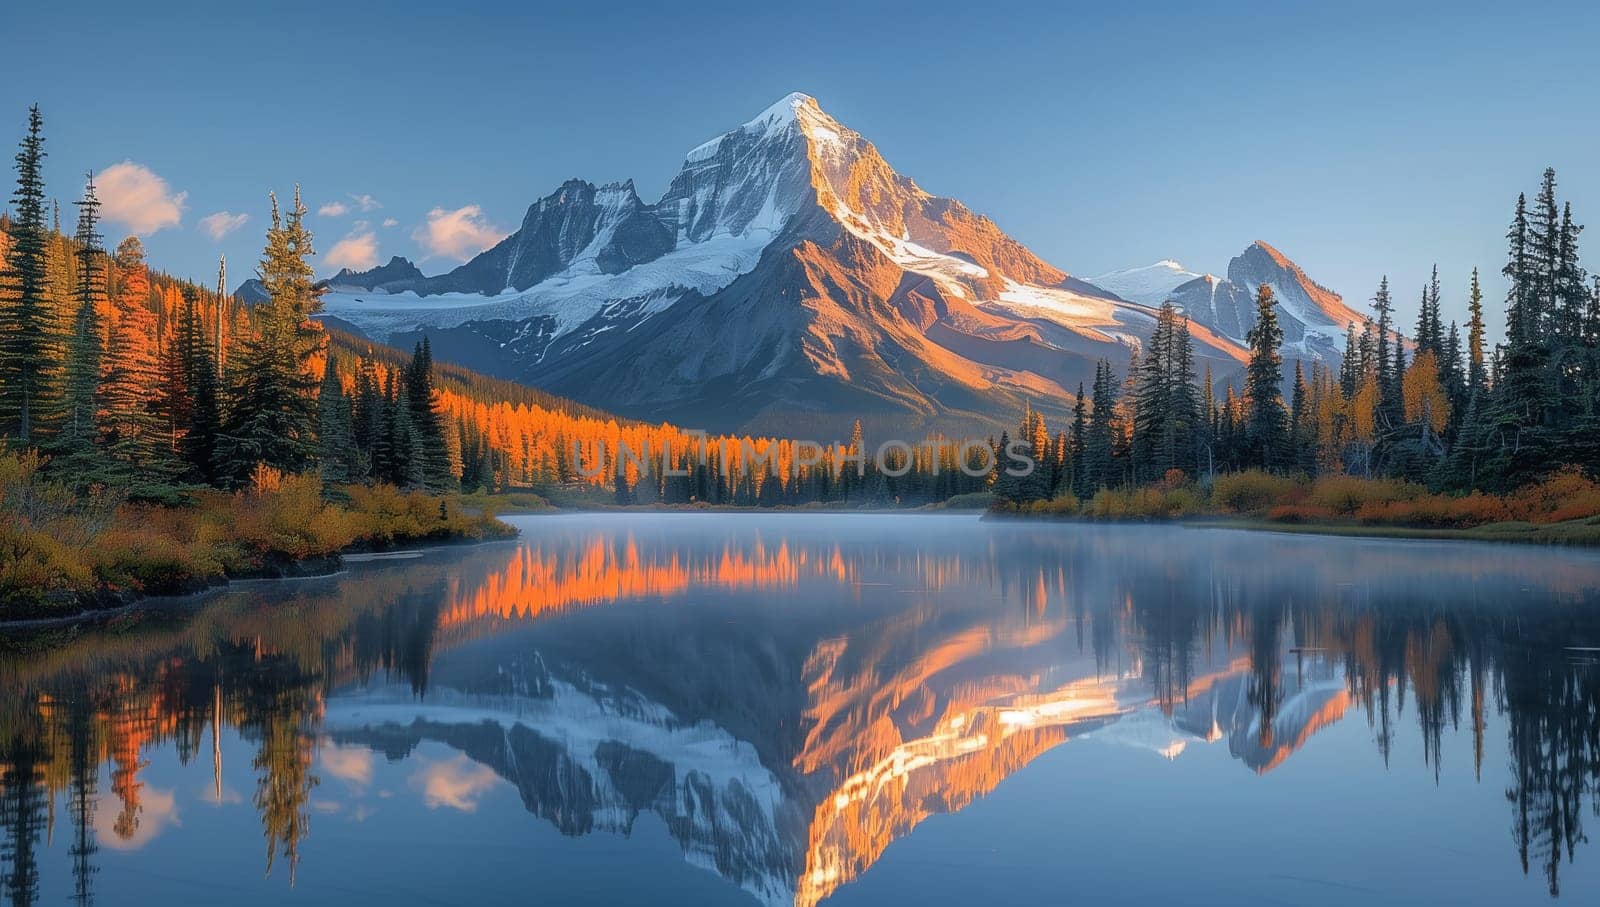 A mountain is mirrored in the tranquil waters of a lake, embraced by a lush forest of trees, under a vast sky, creating a stunning natural landscape